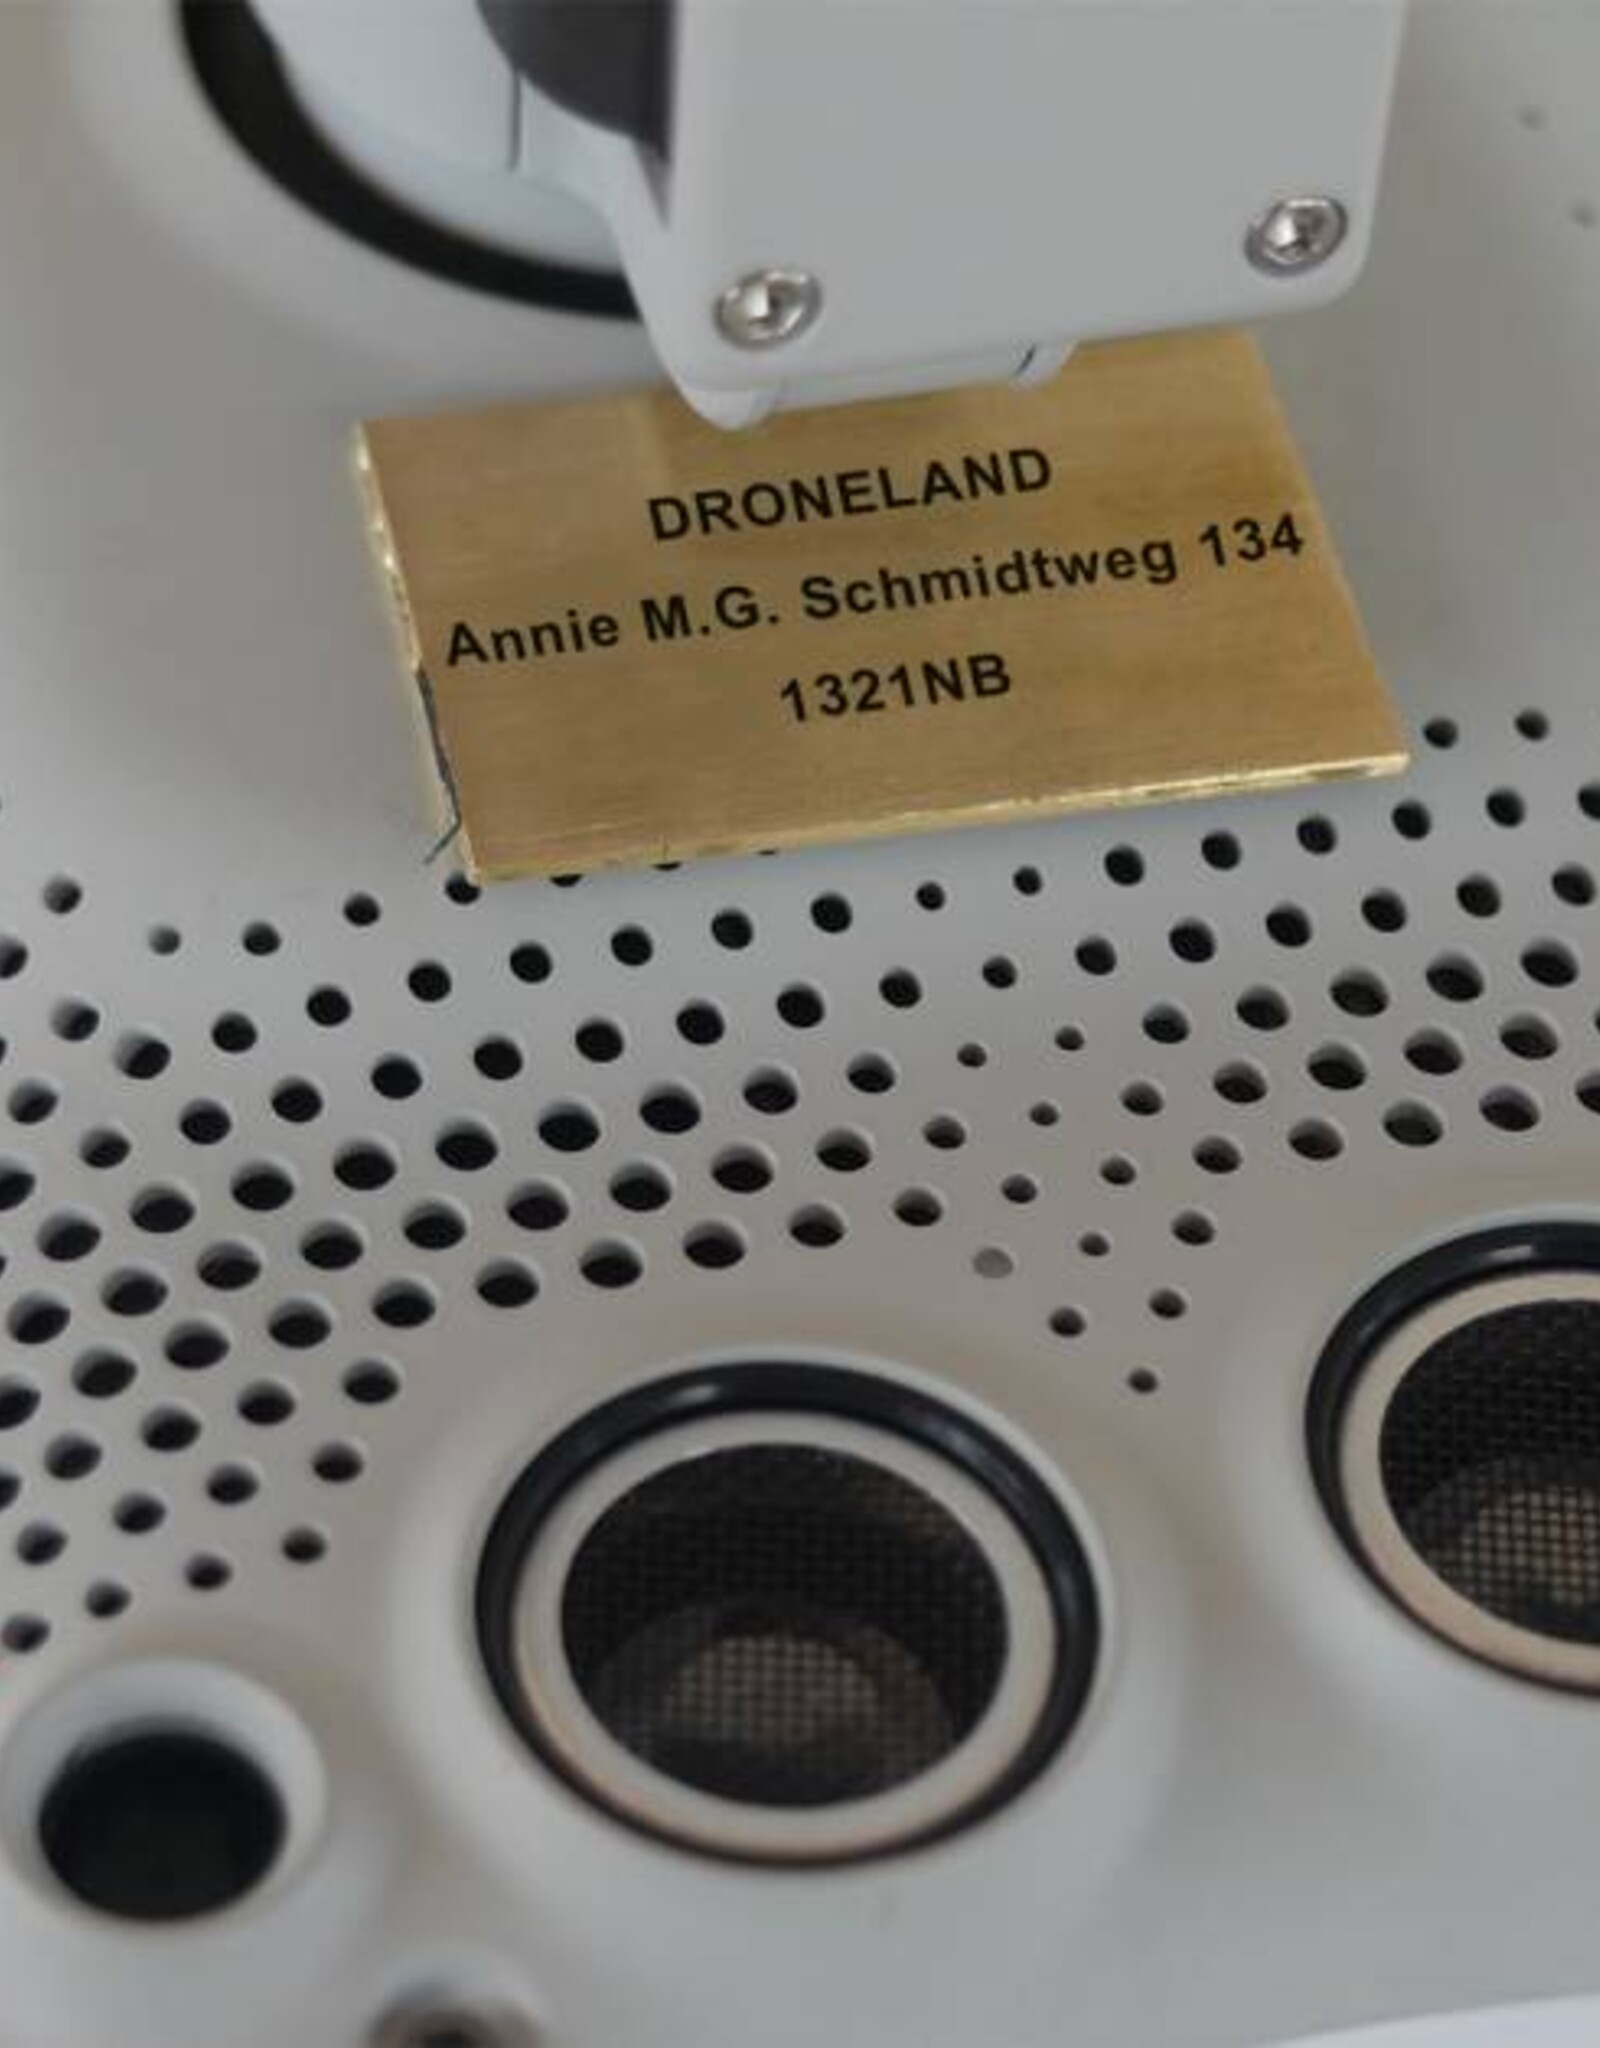 DroneLand Fireproof plate / ID TAG